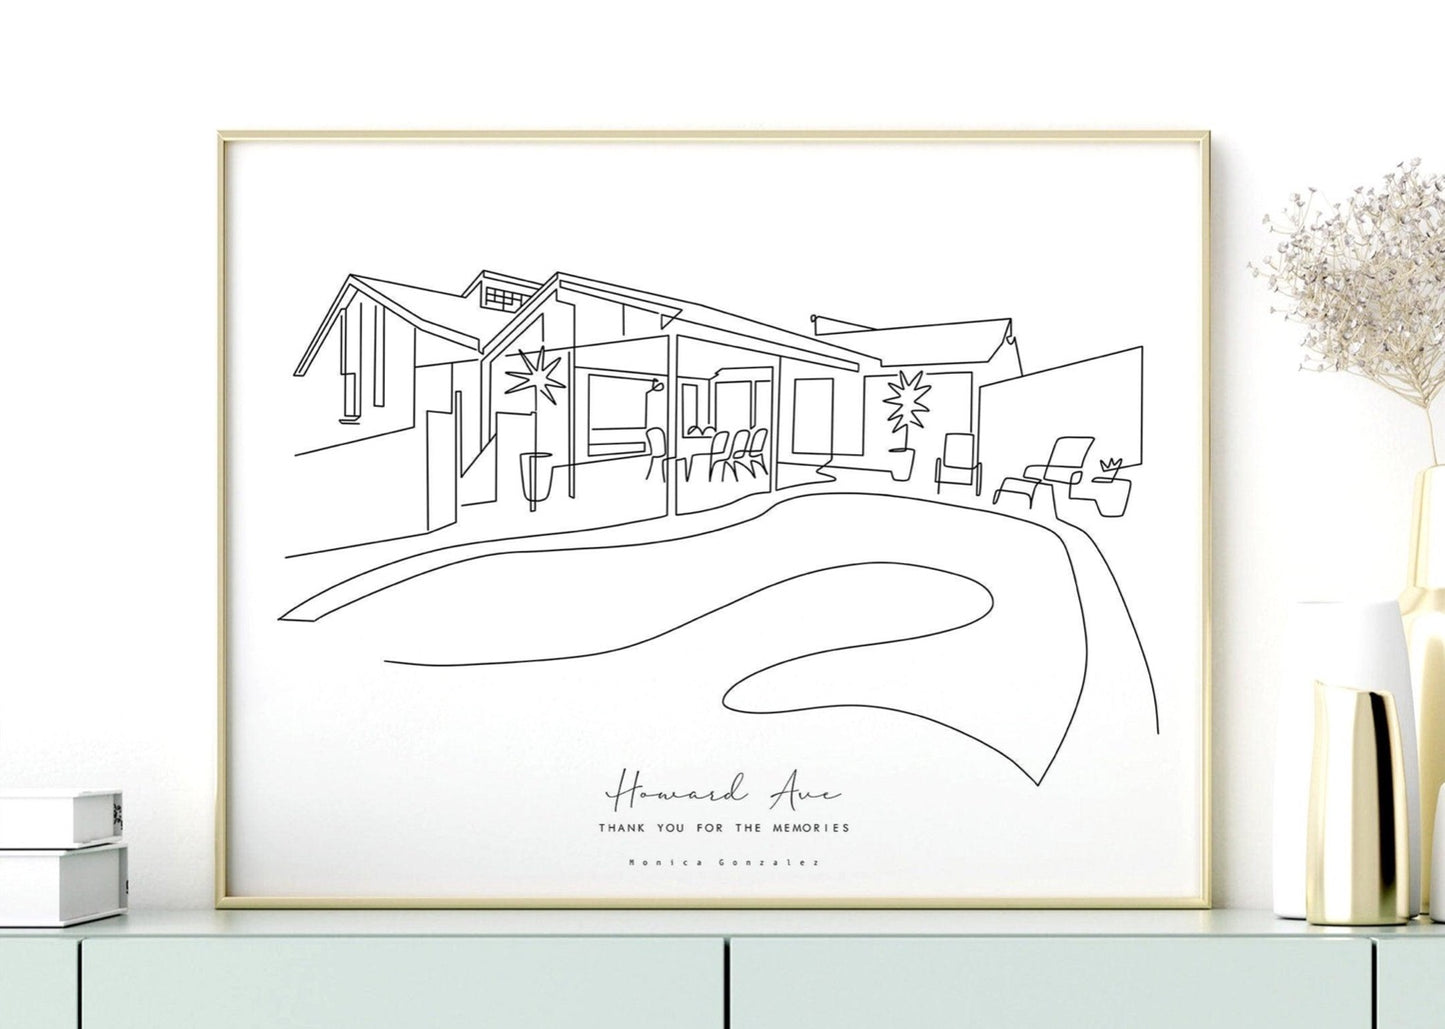 Minimalist line portrait of a house with the address written at the bottom